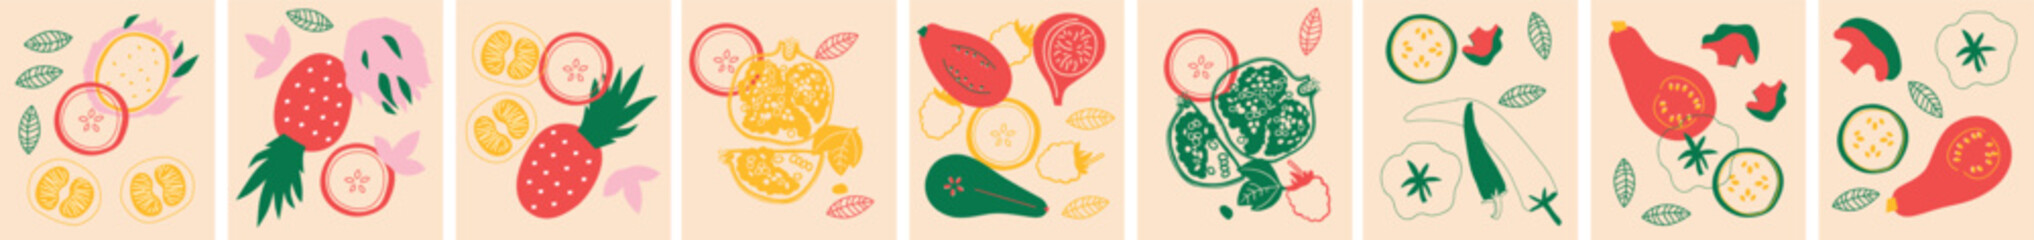 Fruits and vegetables set. Flat abstract vector. Collection fruits, berries and vegetables art